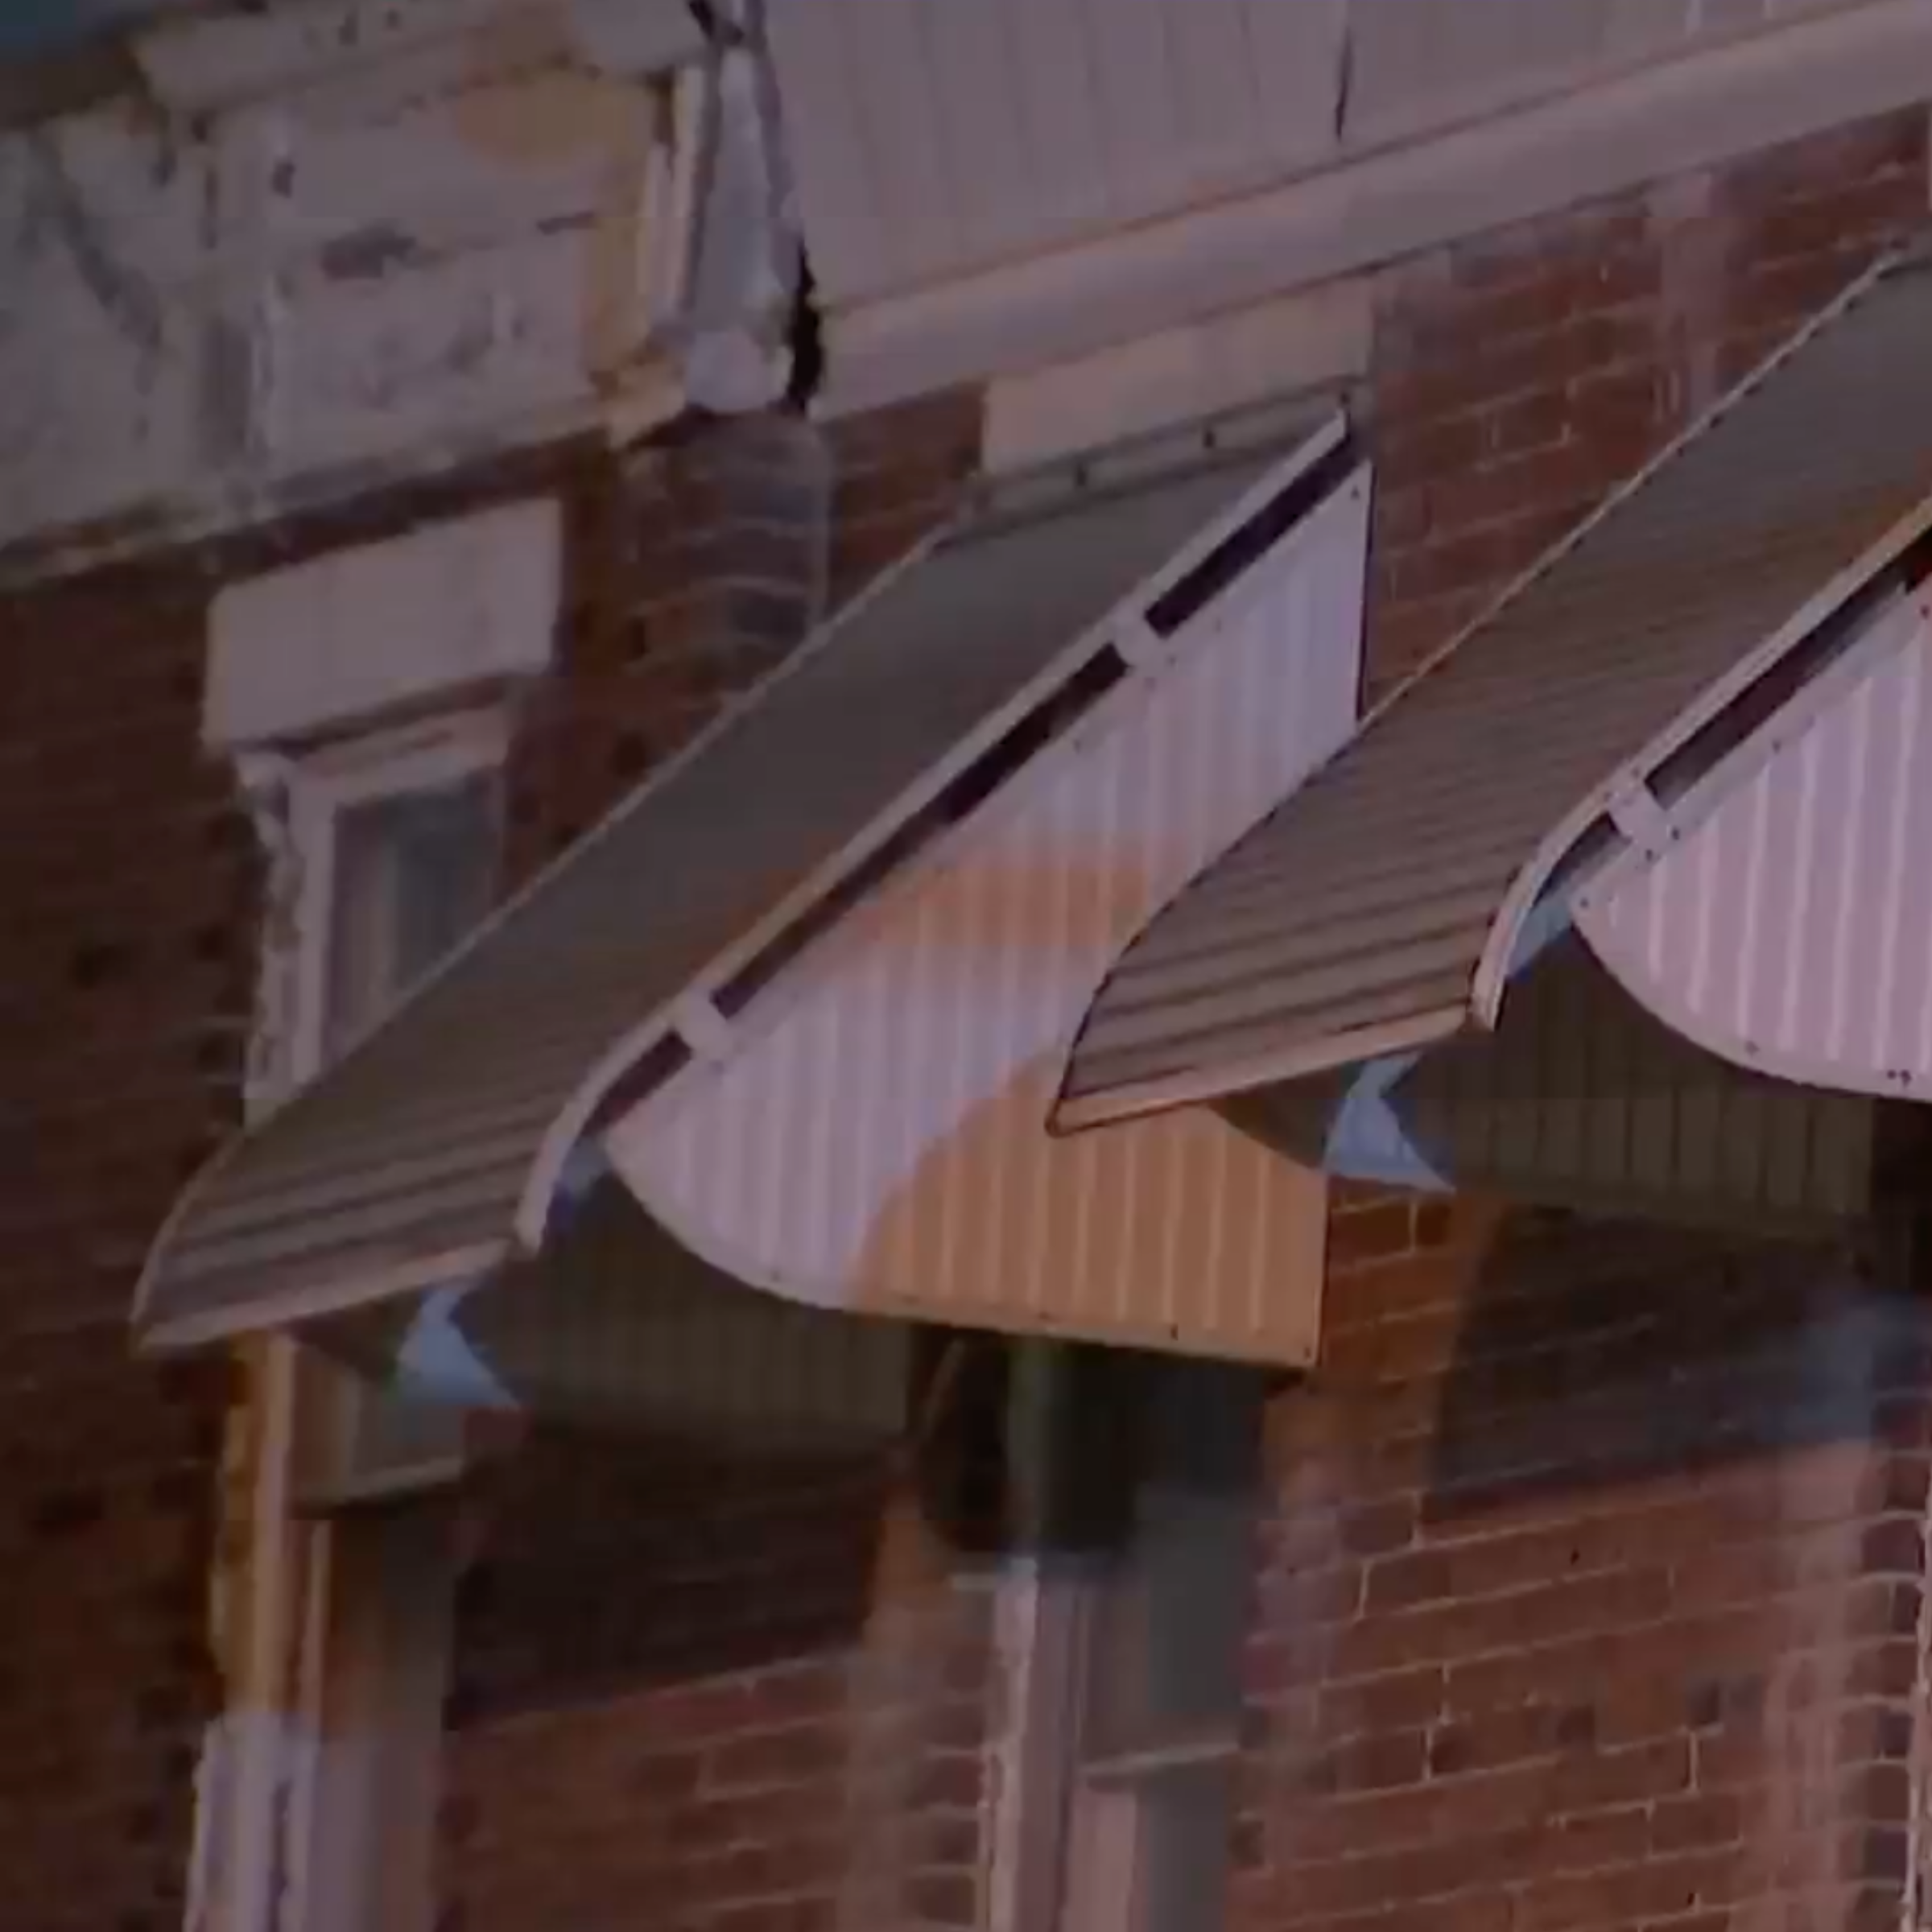 2 teens injured after 40 shots fired in West Philadelphia; stray bullet went through woman's bedroom window